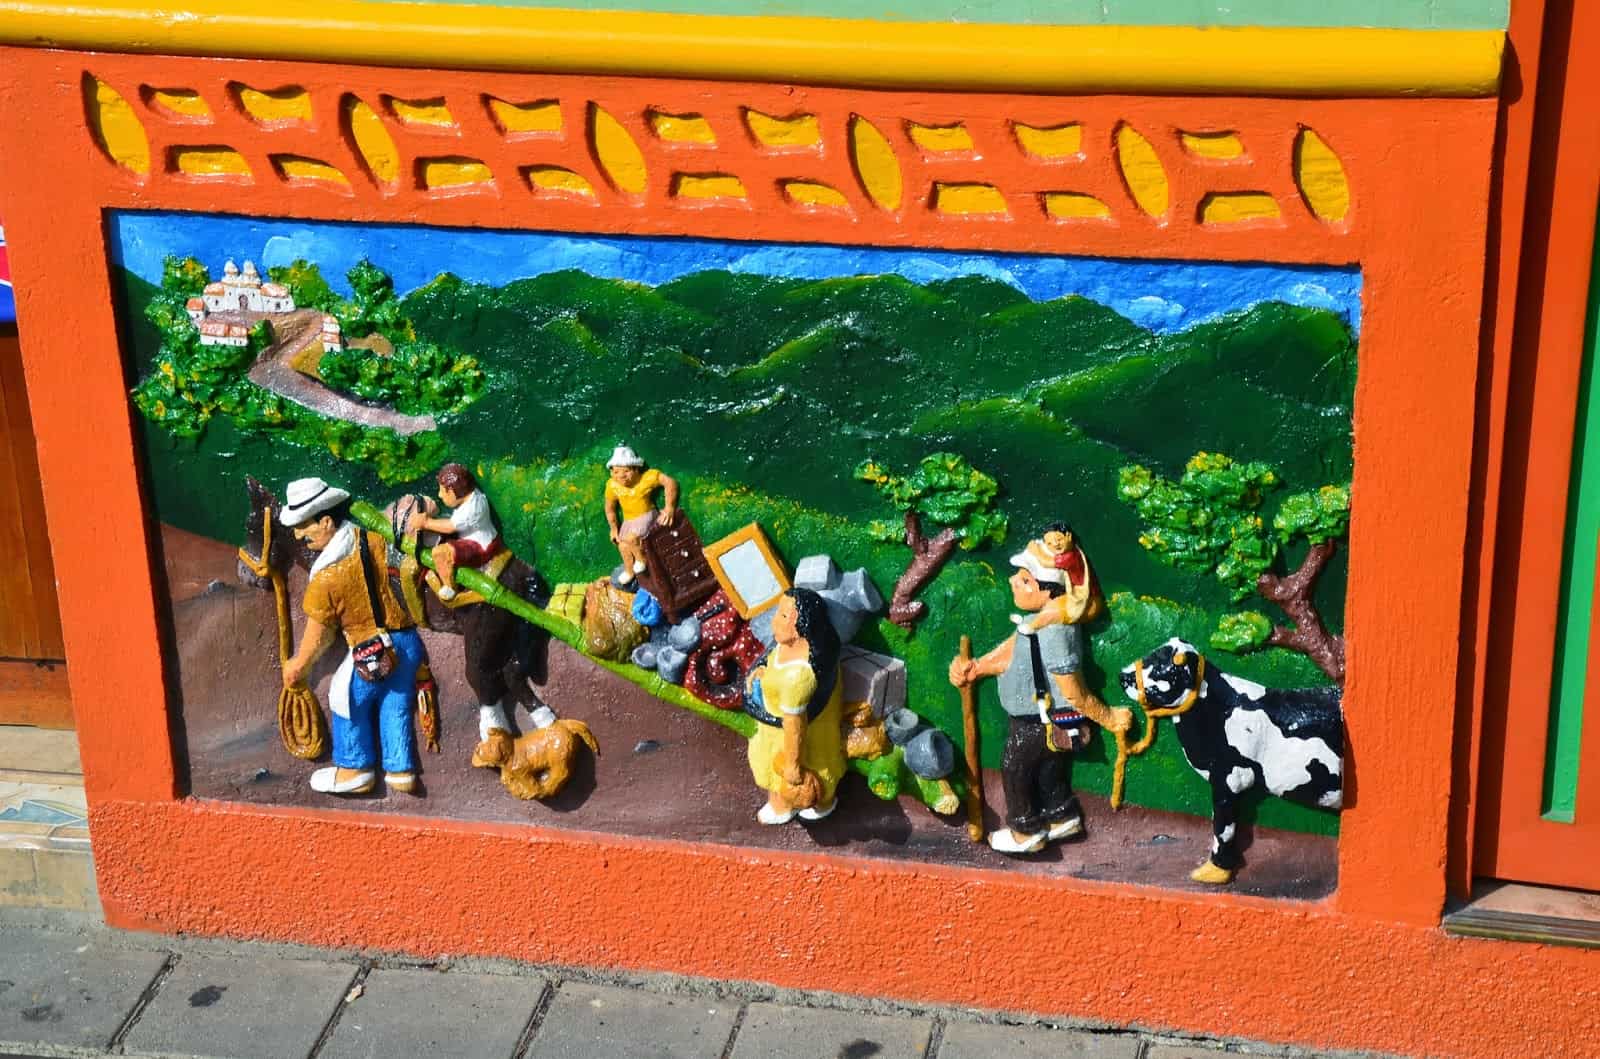 Zócalo depicting rural life in Guatapé, Antioquia, Colombia